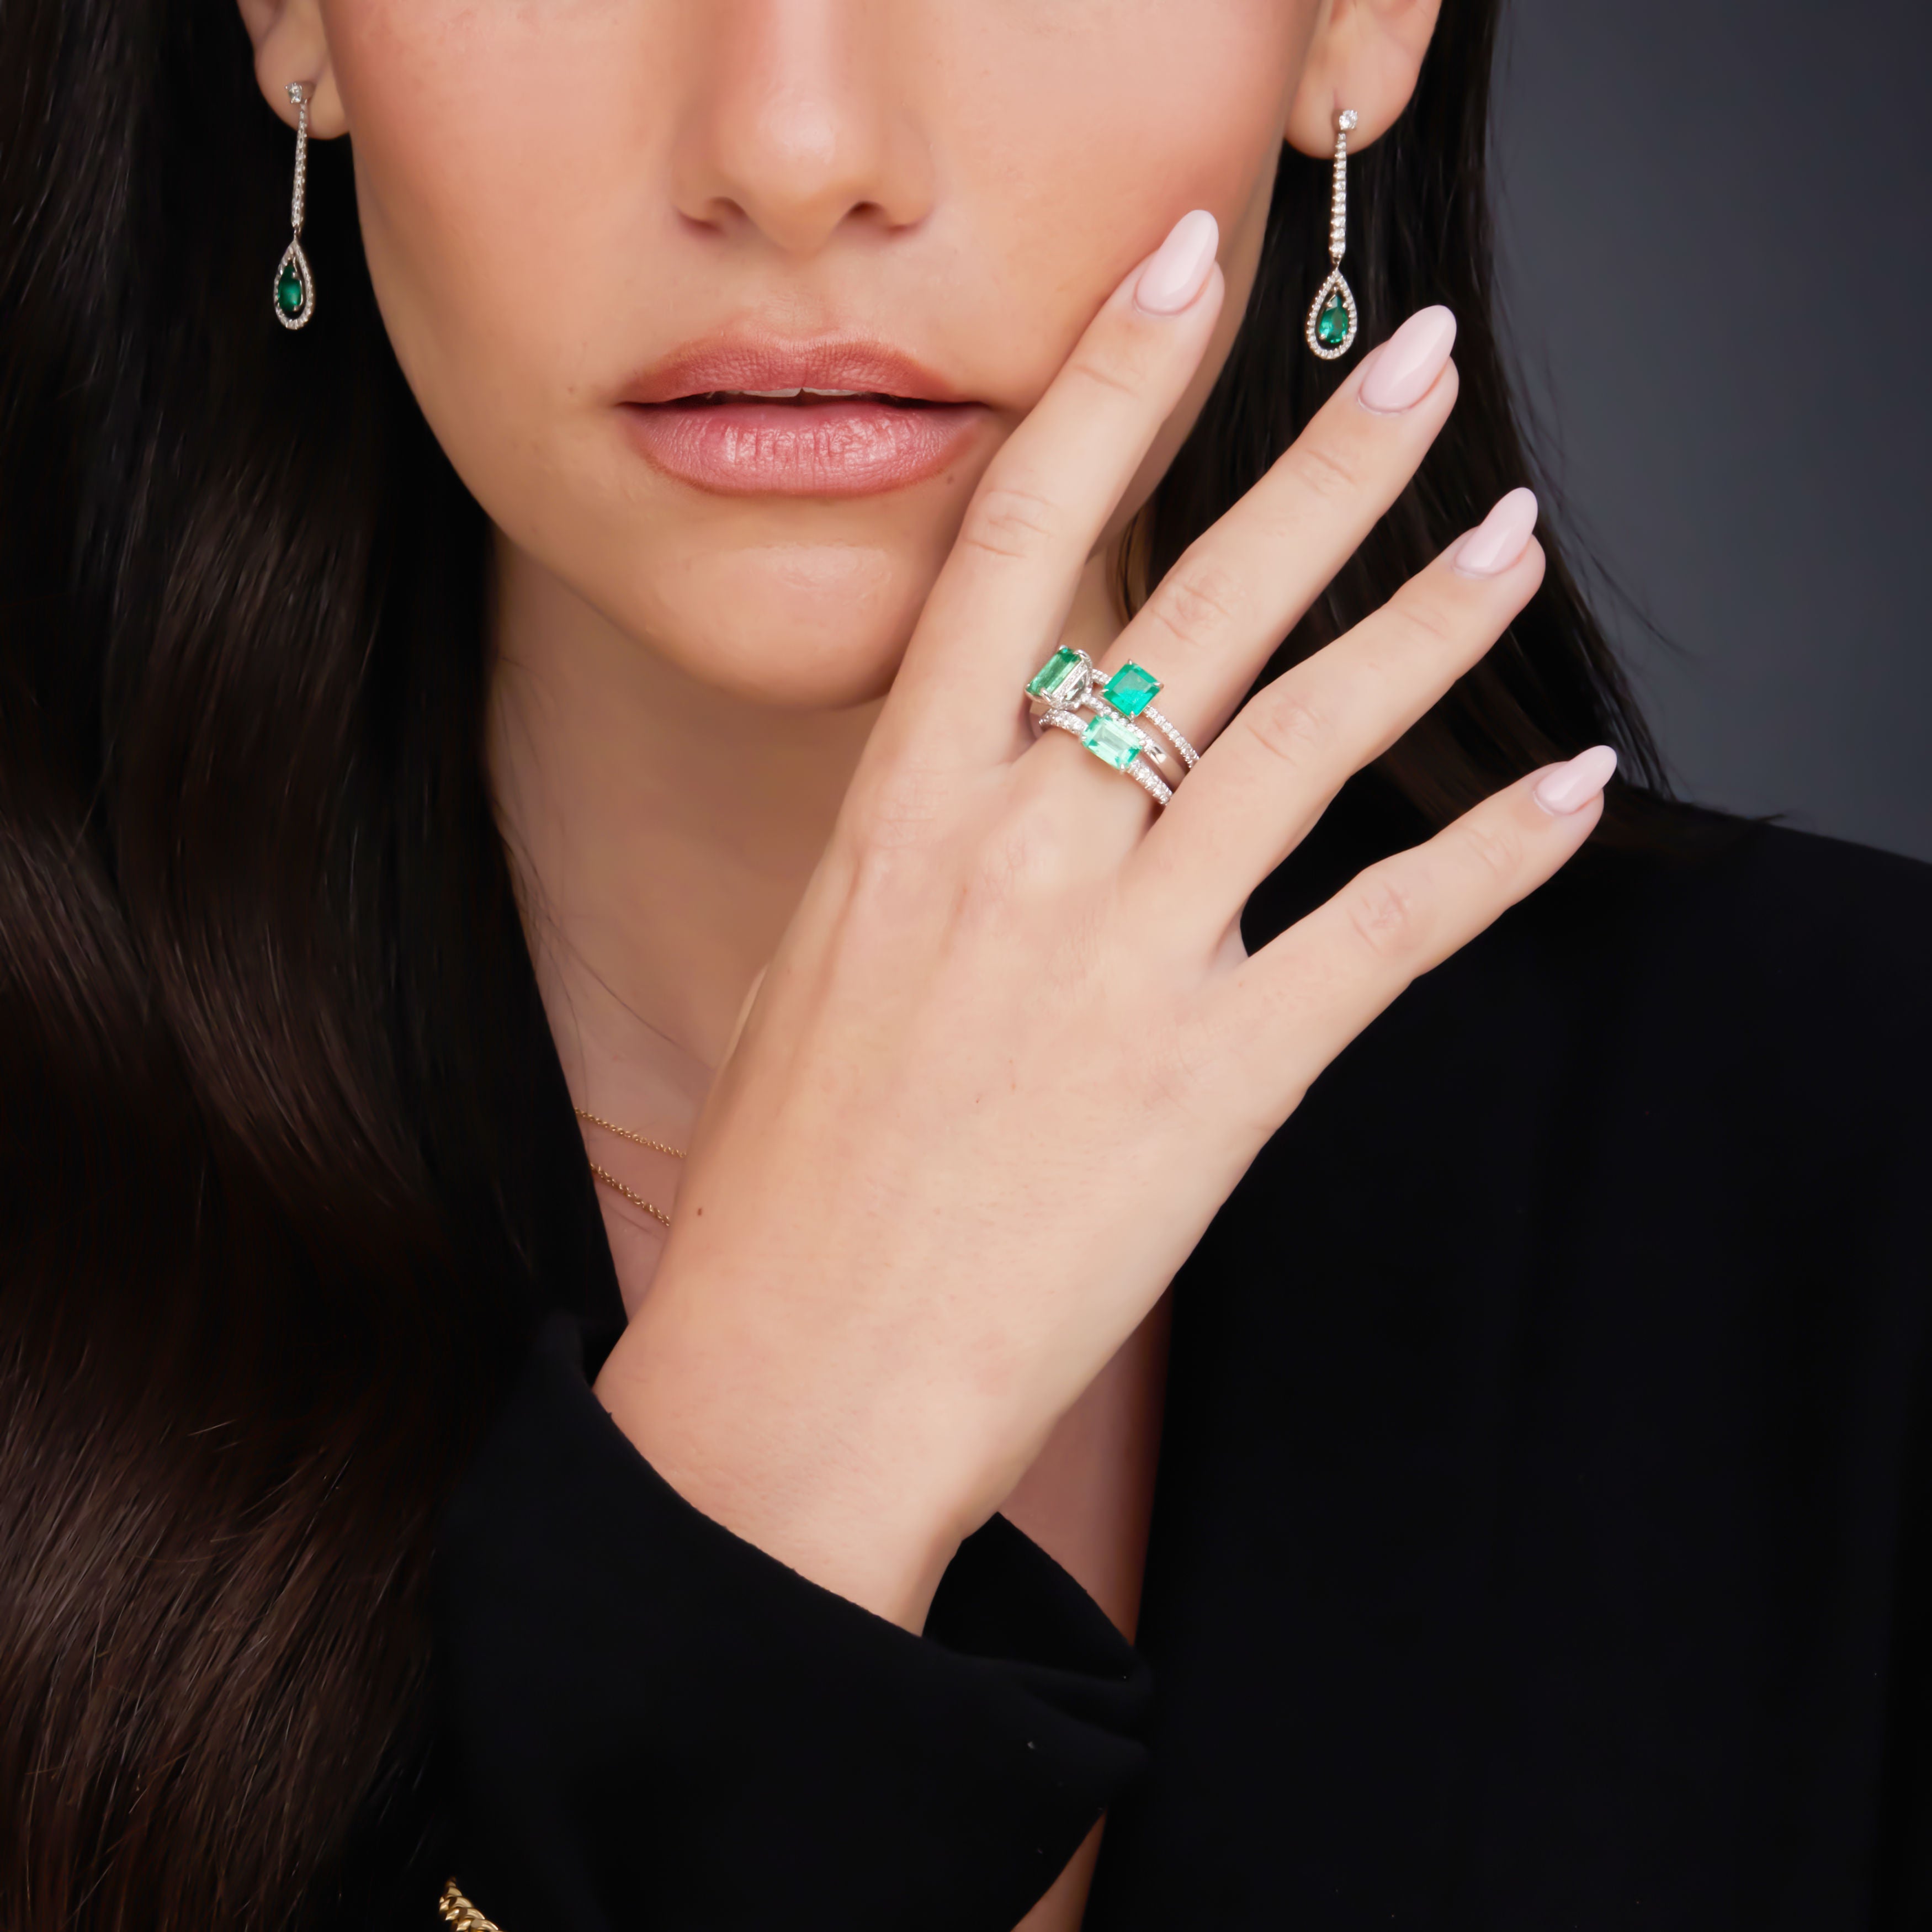 Square Emerald with Diamonds Gold Ring - 0.95ct TW